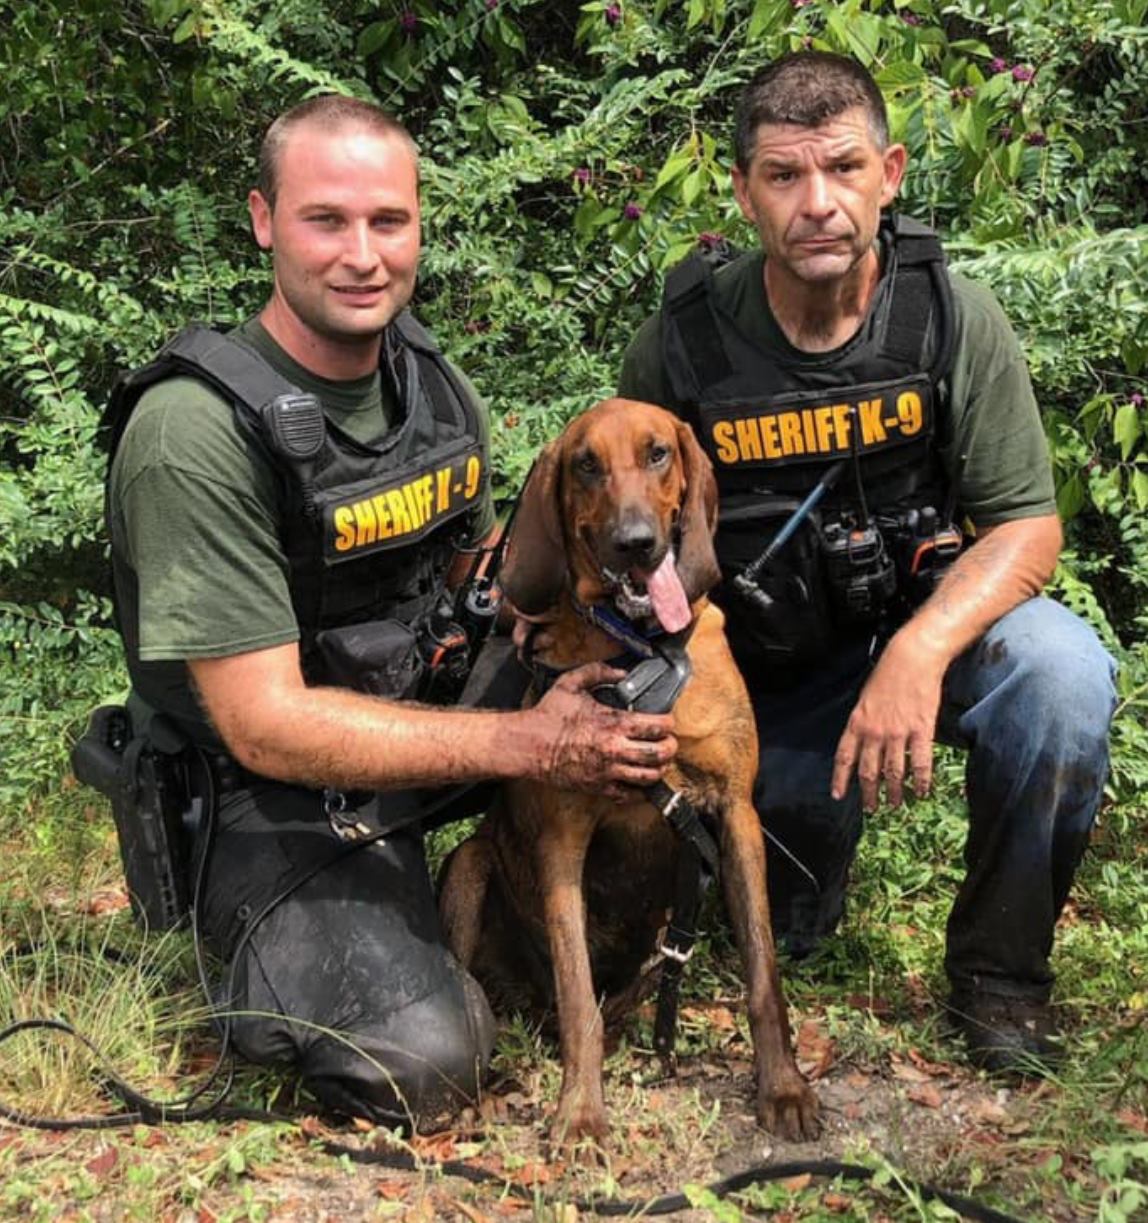 Service dog found the kid with autism who got lost in the woods for 30 minutes